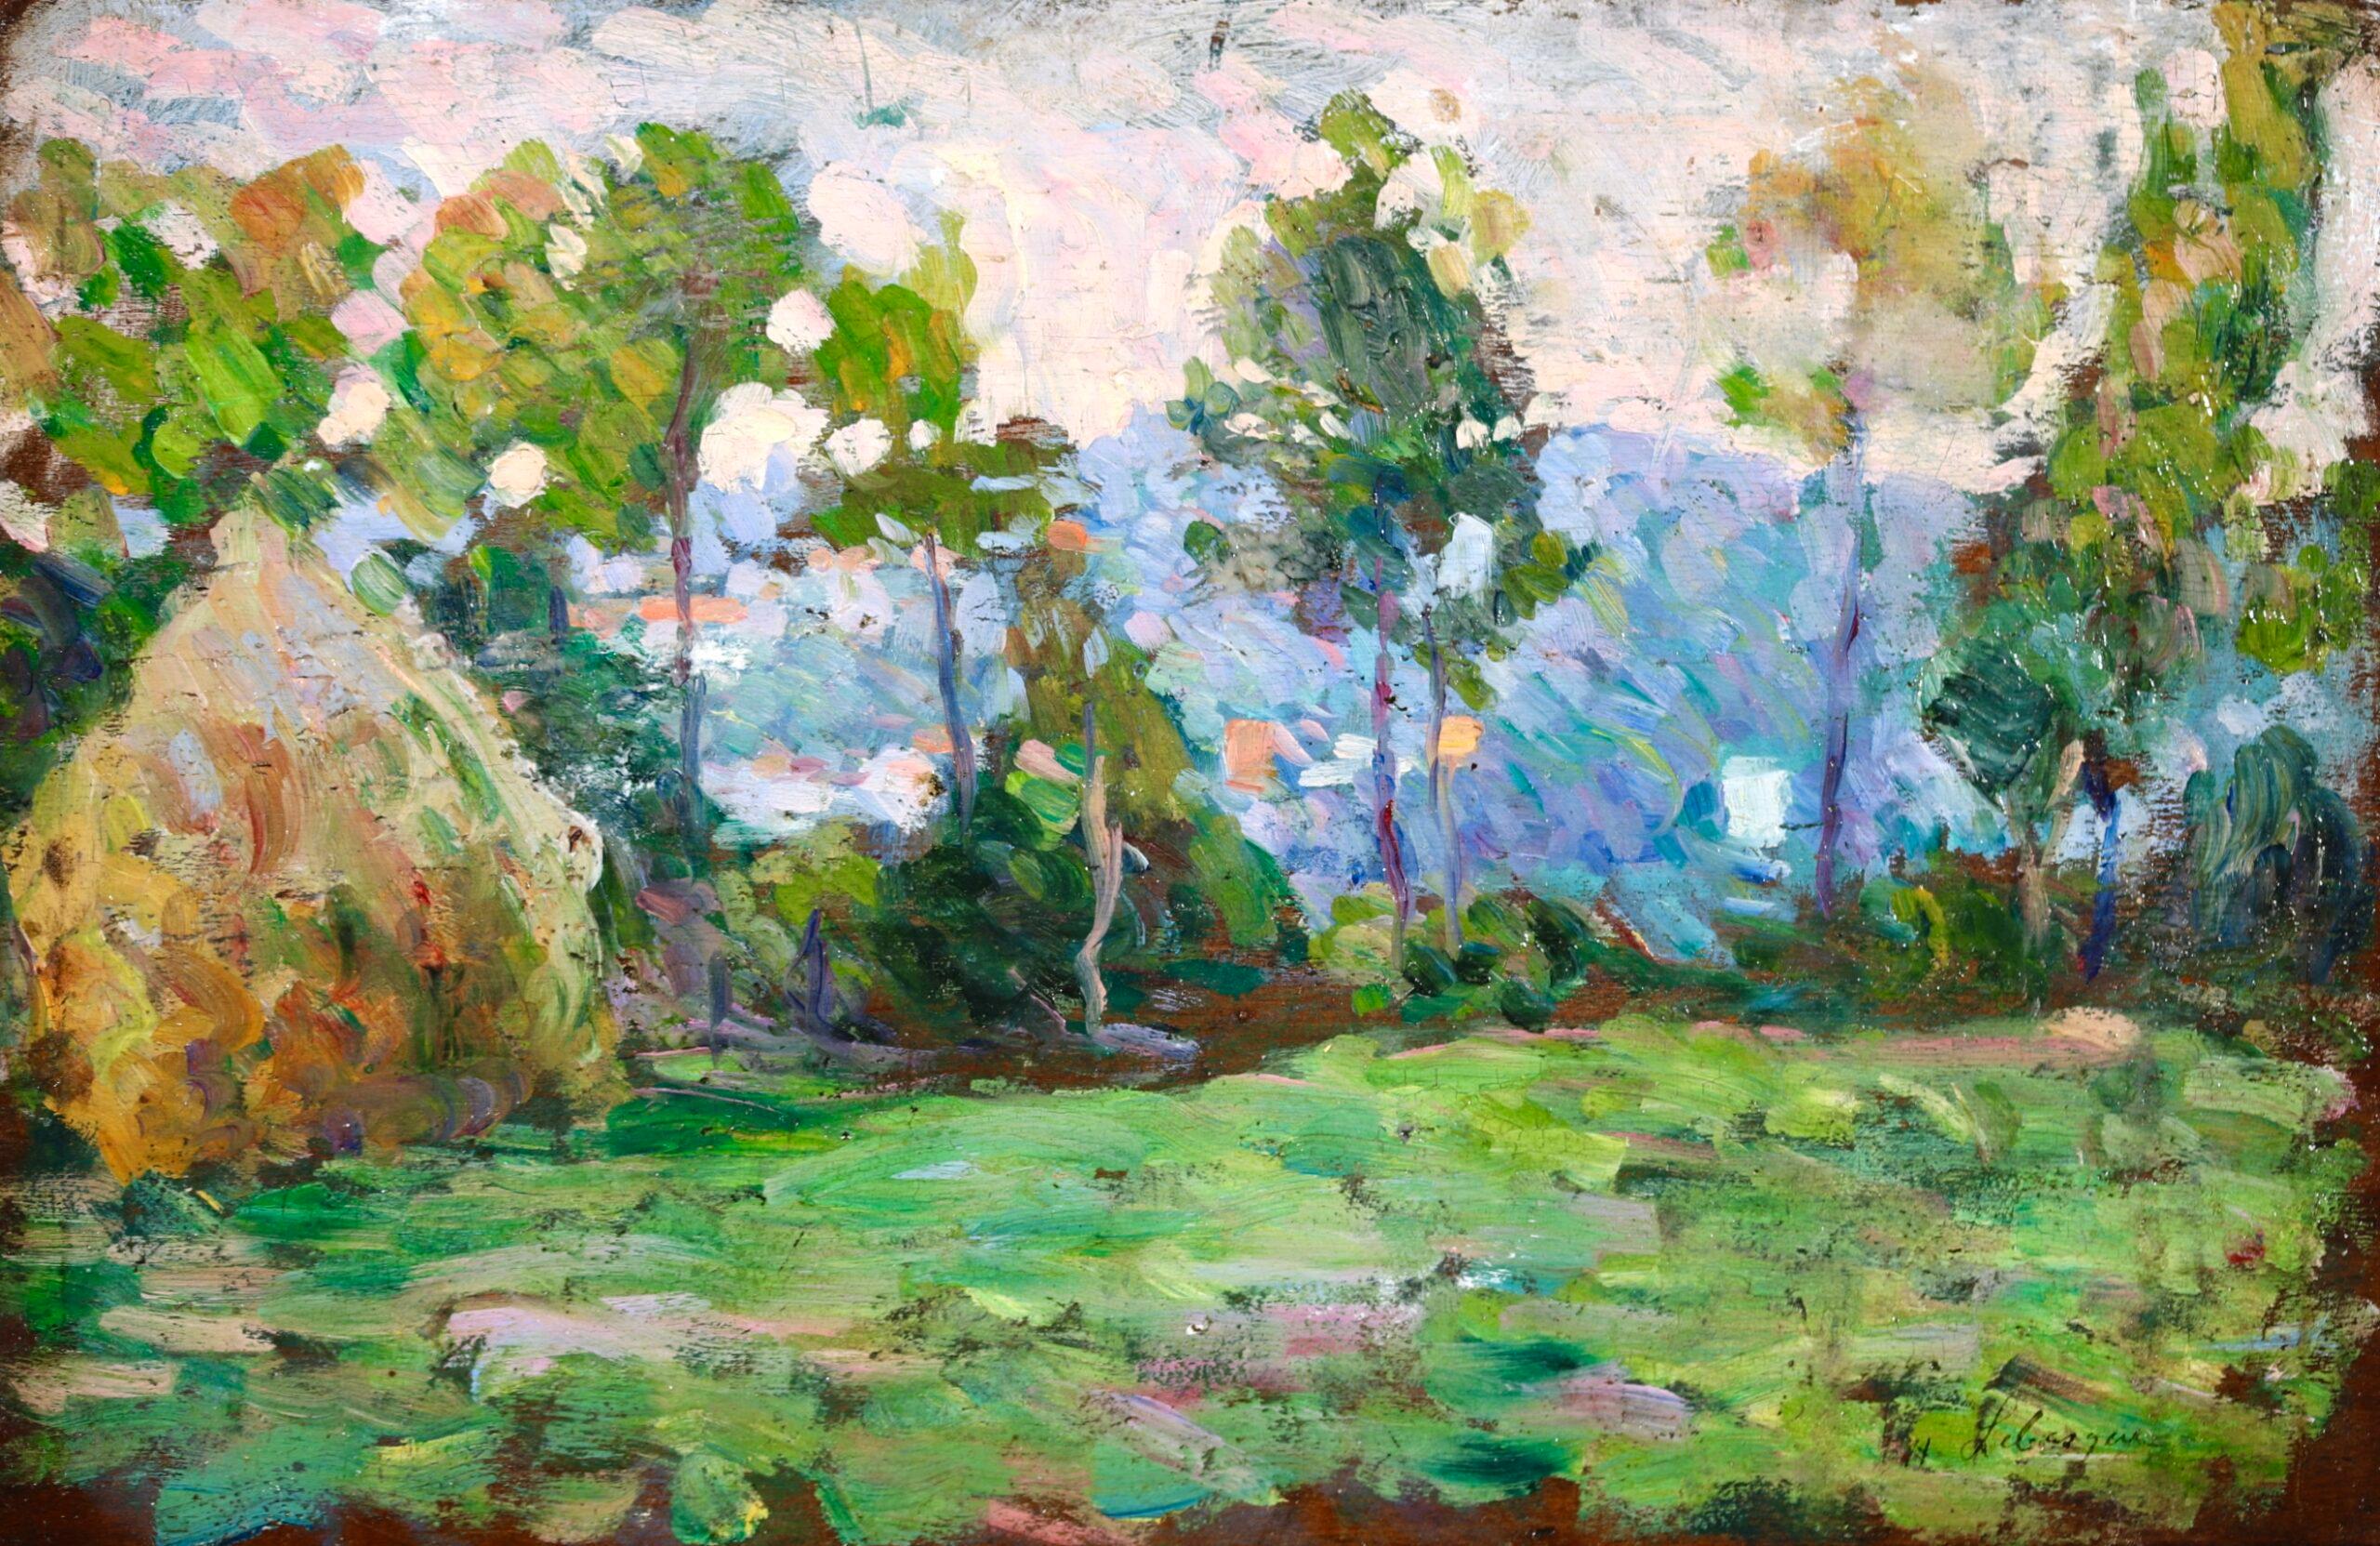 Signed oil on panel landscape circa 1900 by French post impressionist painter Henri Lebasque. The work depicts a field lined with trees with a haystack to the left. There is a view of the mountains beyond. This work is a study for "Paysage avec une